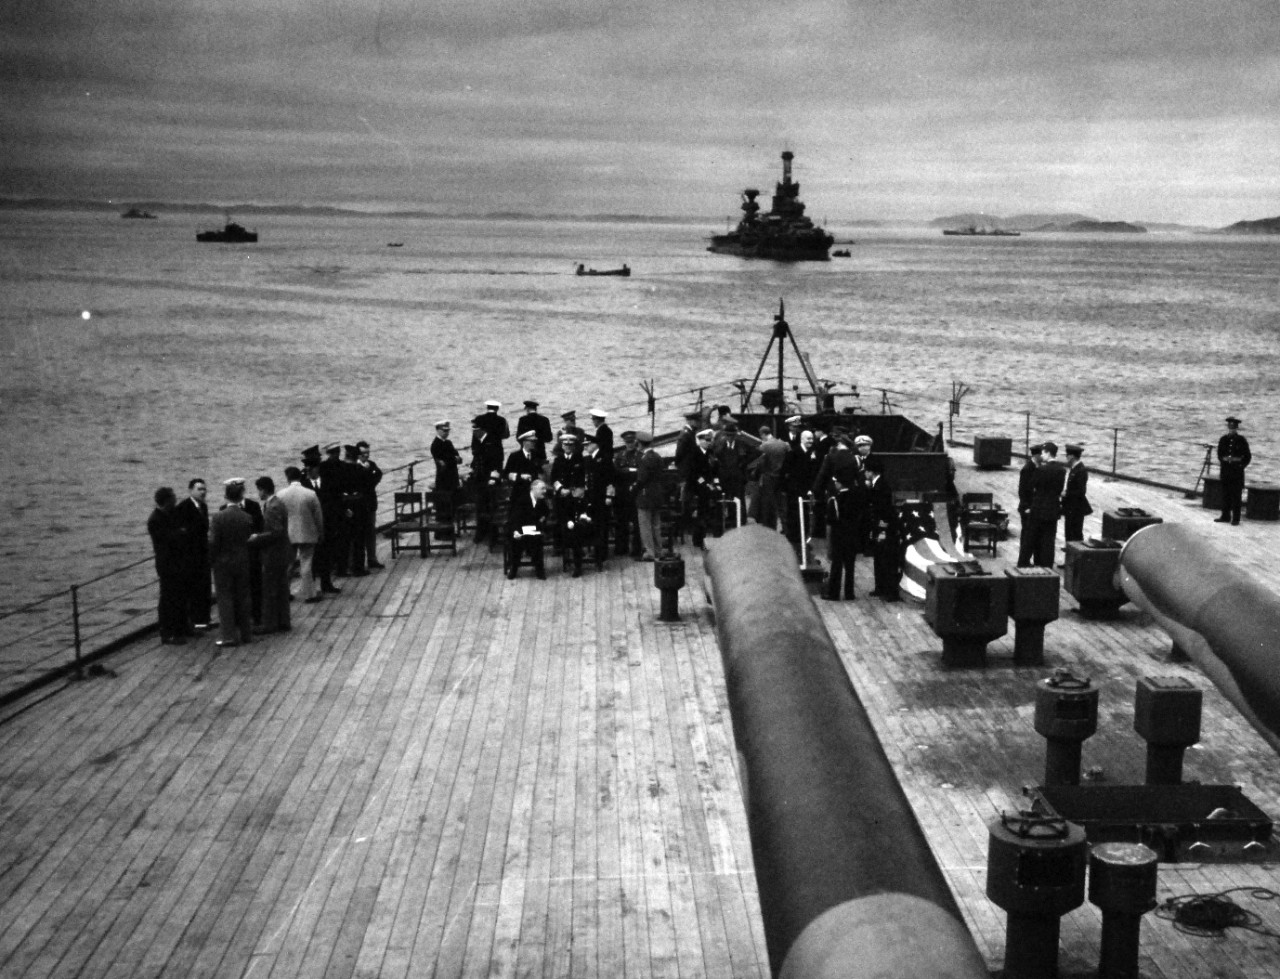 80-G-26879: Atlantic Charter, August 1941.  Informal group photograph including President Franklin D. Roosevelt and Prime Minister Winston S. Churchill on deck of HMS Prince of Wales during church services during the Atlantic Charter.  Photograph released August 1941.   Official U.S. Navy Photograph, now in the collections of the National Archives.  (2016/03/22).